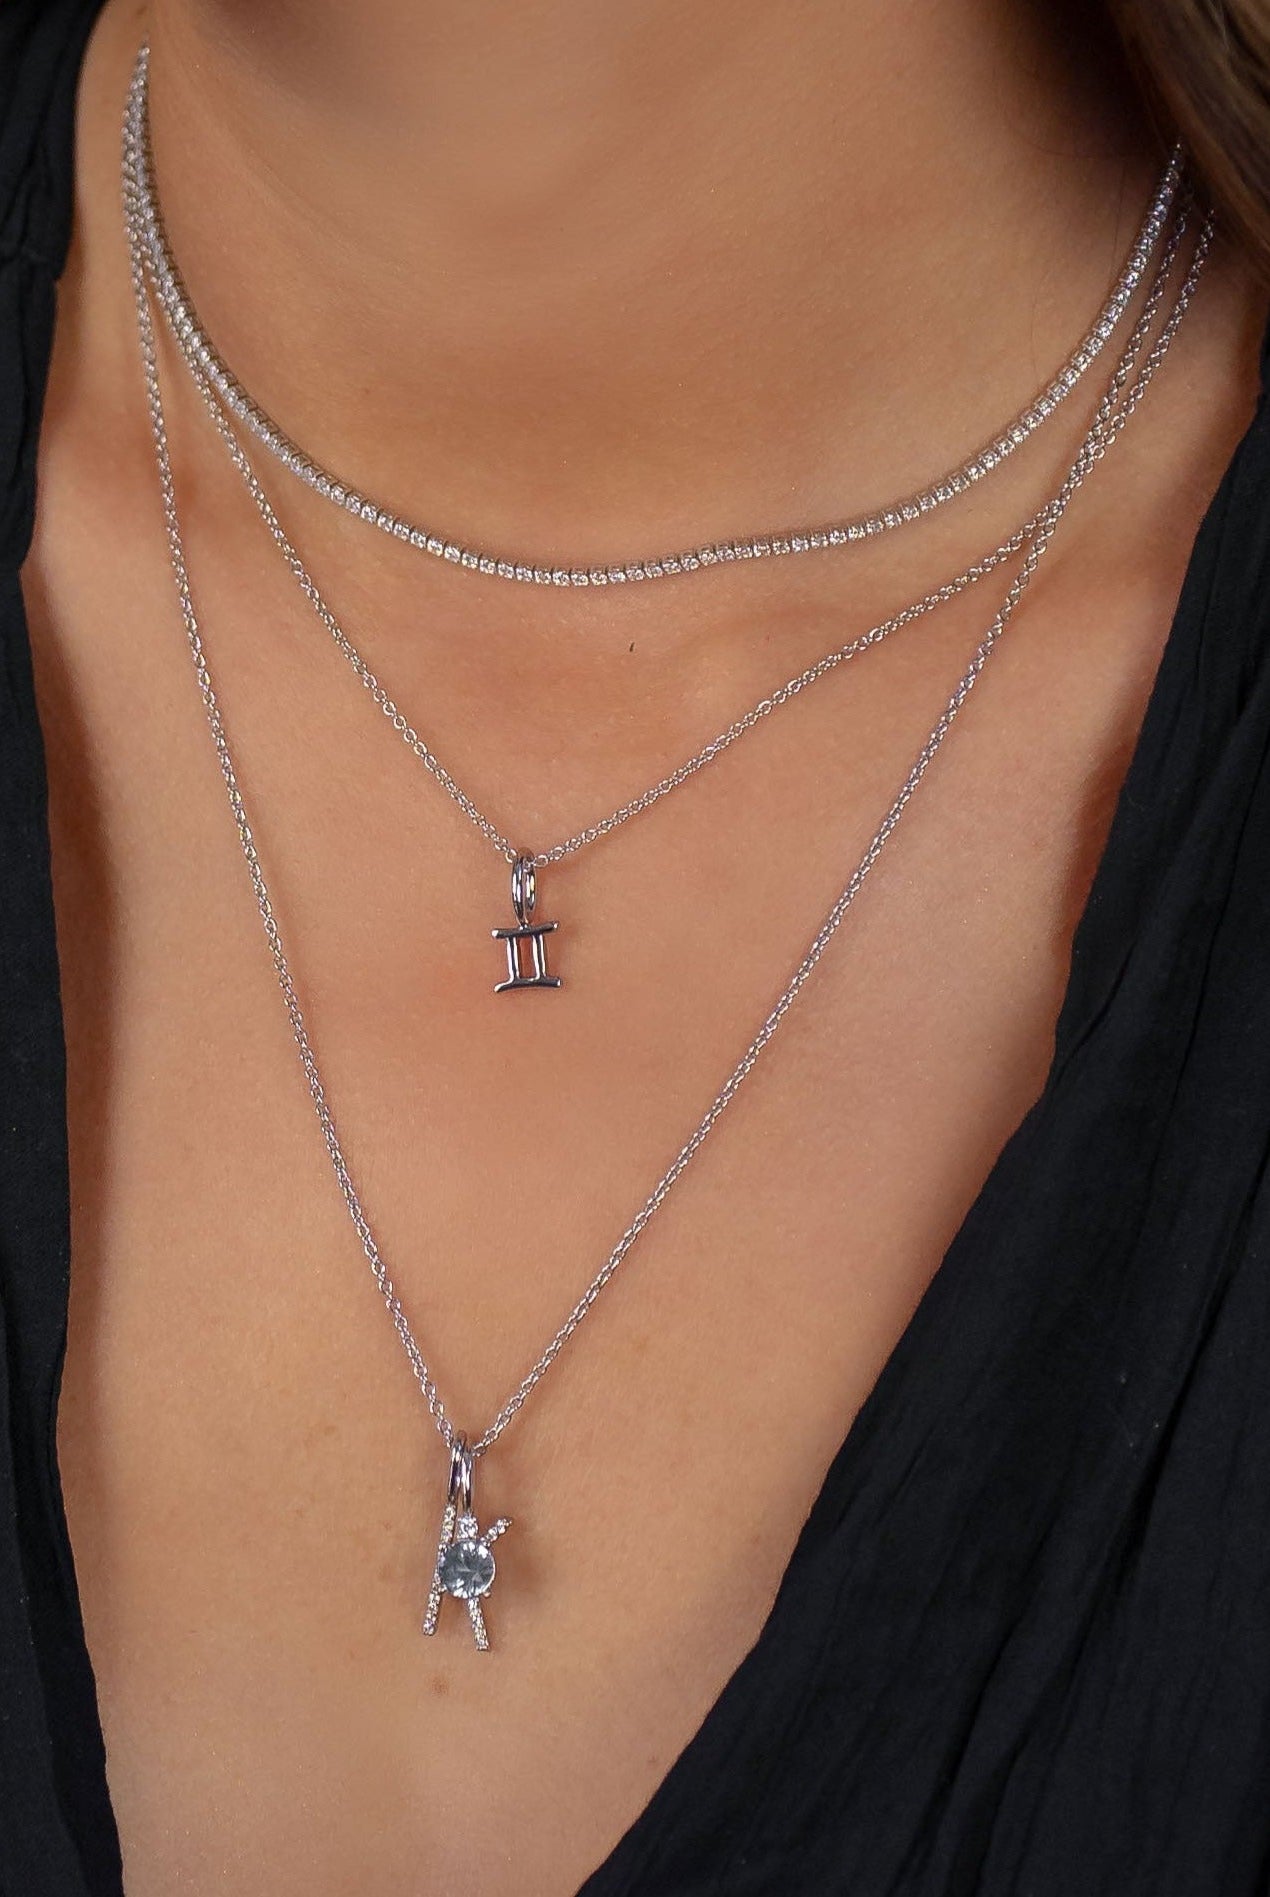 Skinny Cable Chain Necklace-Necklaces-The Sis Kiss®-Urban Threadz Boutique, Women's Fashion Boutique in Saugatuck, MI